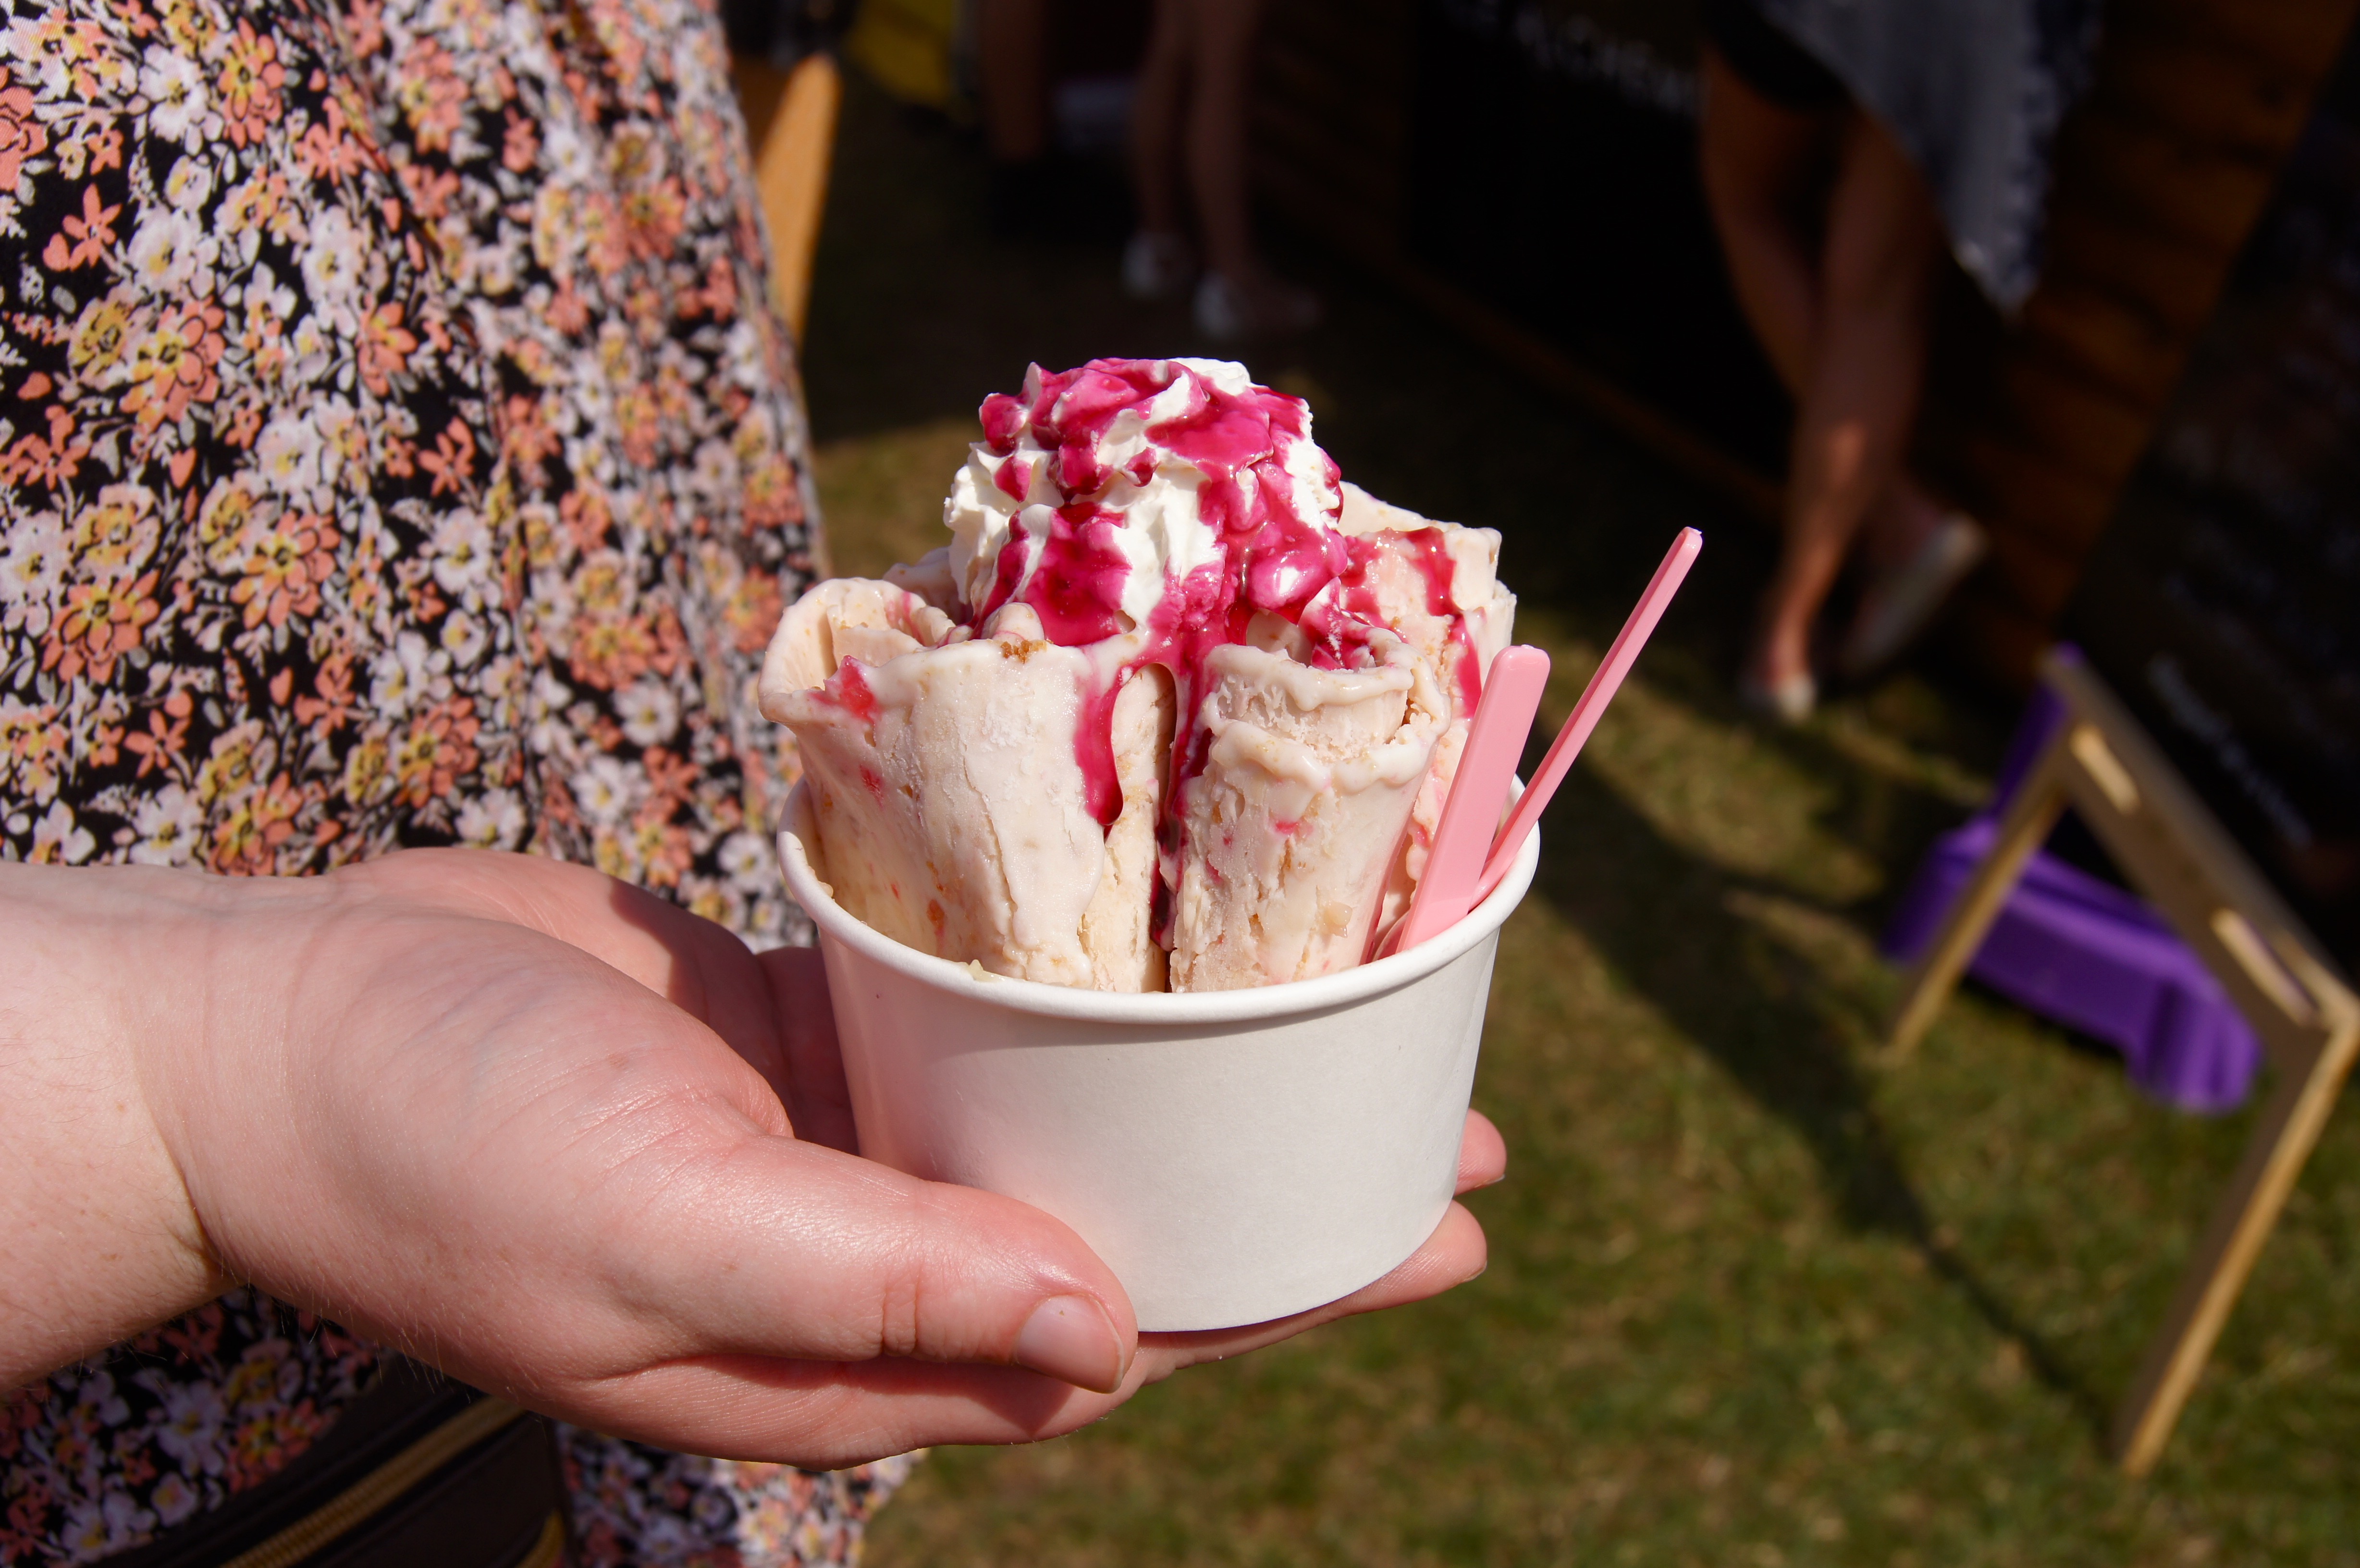 Manchester Eats Festival - The Experience - Nomad Seeks Home